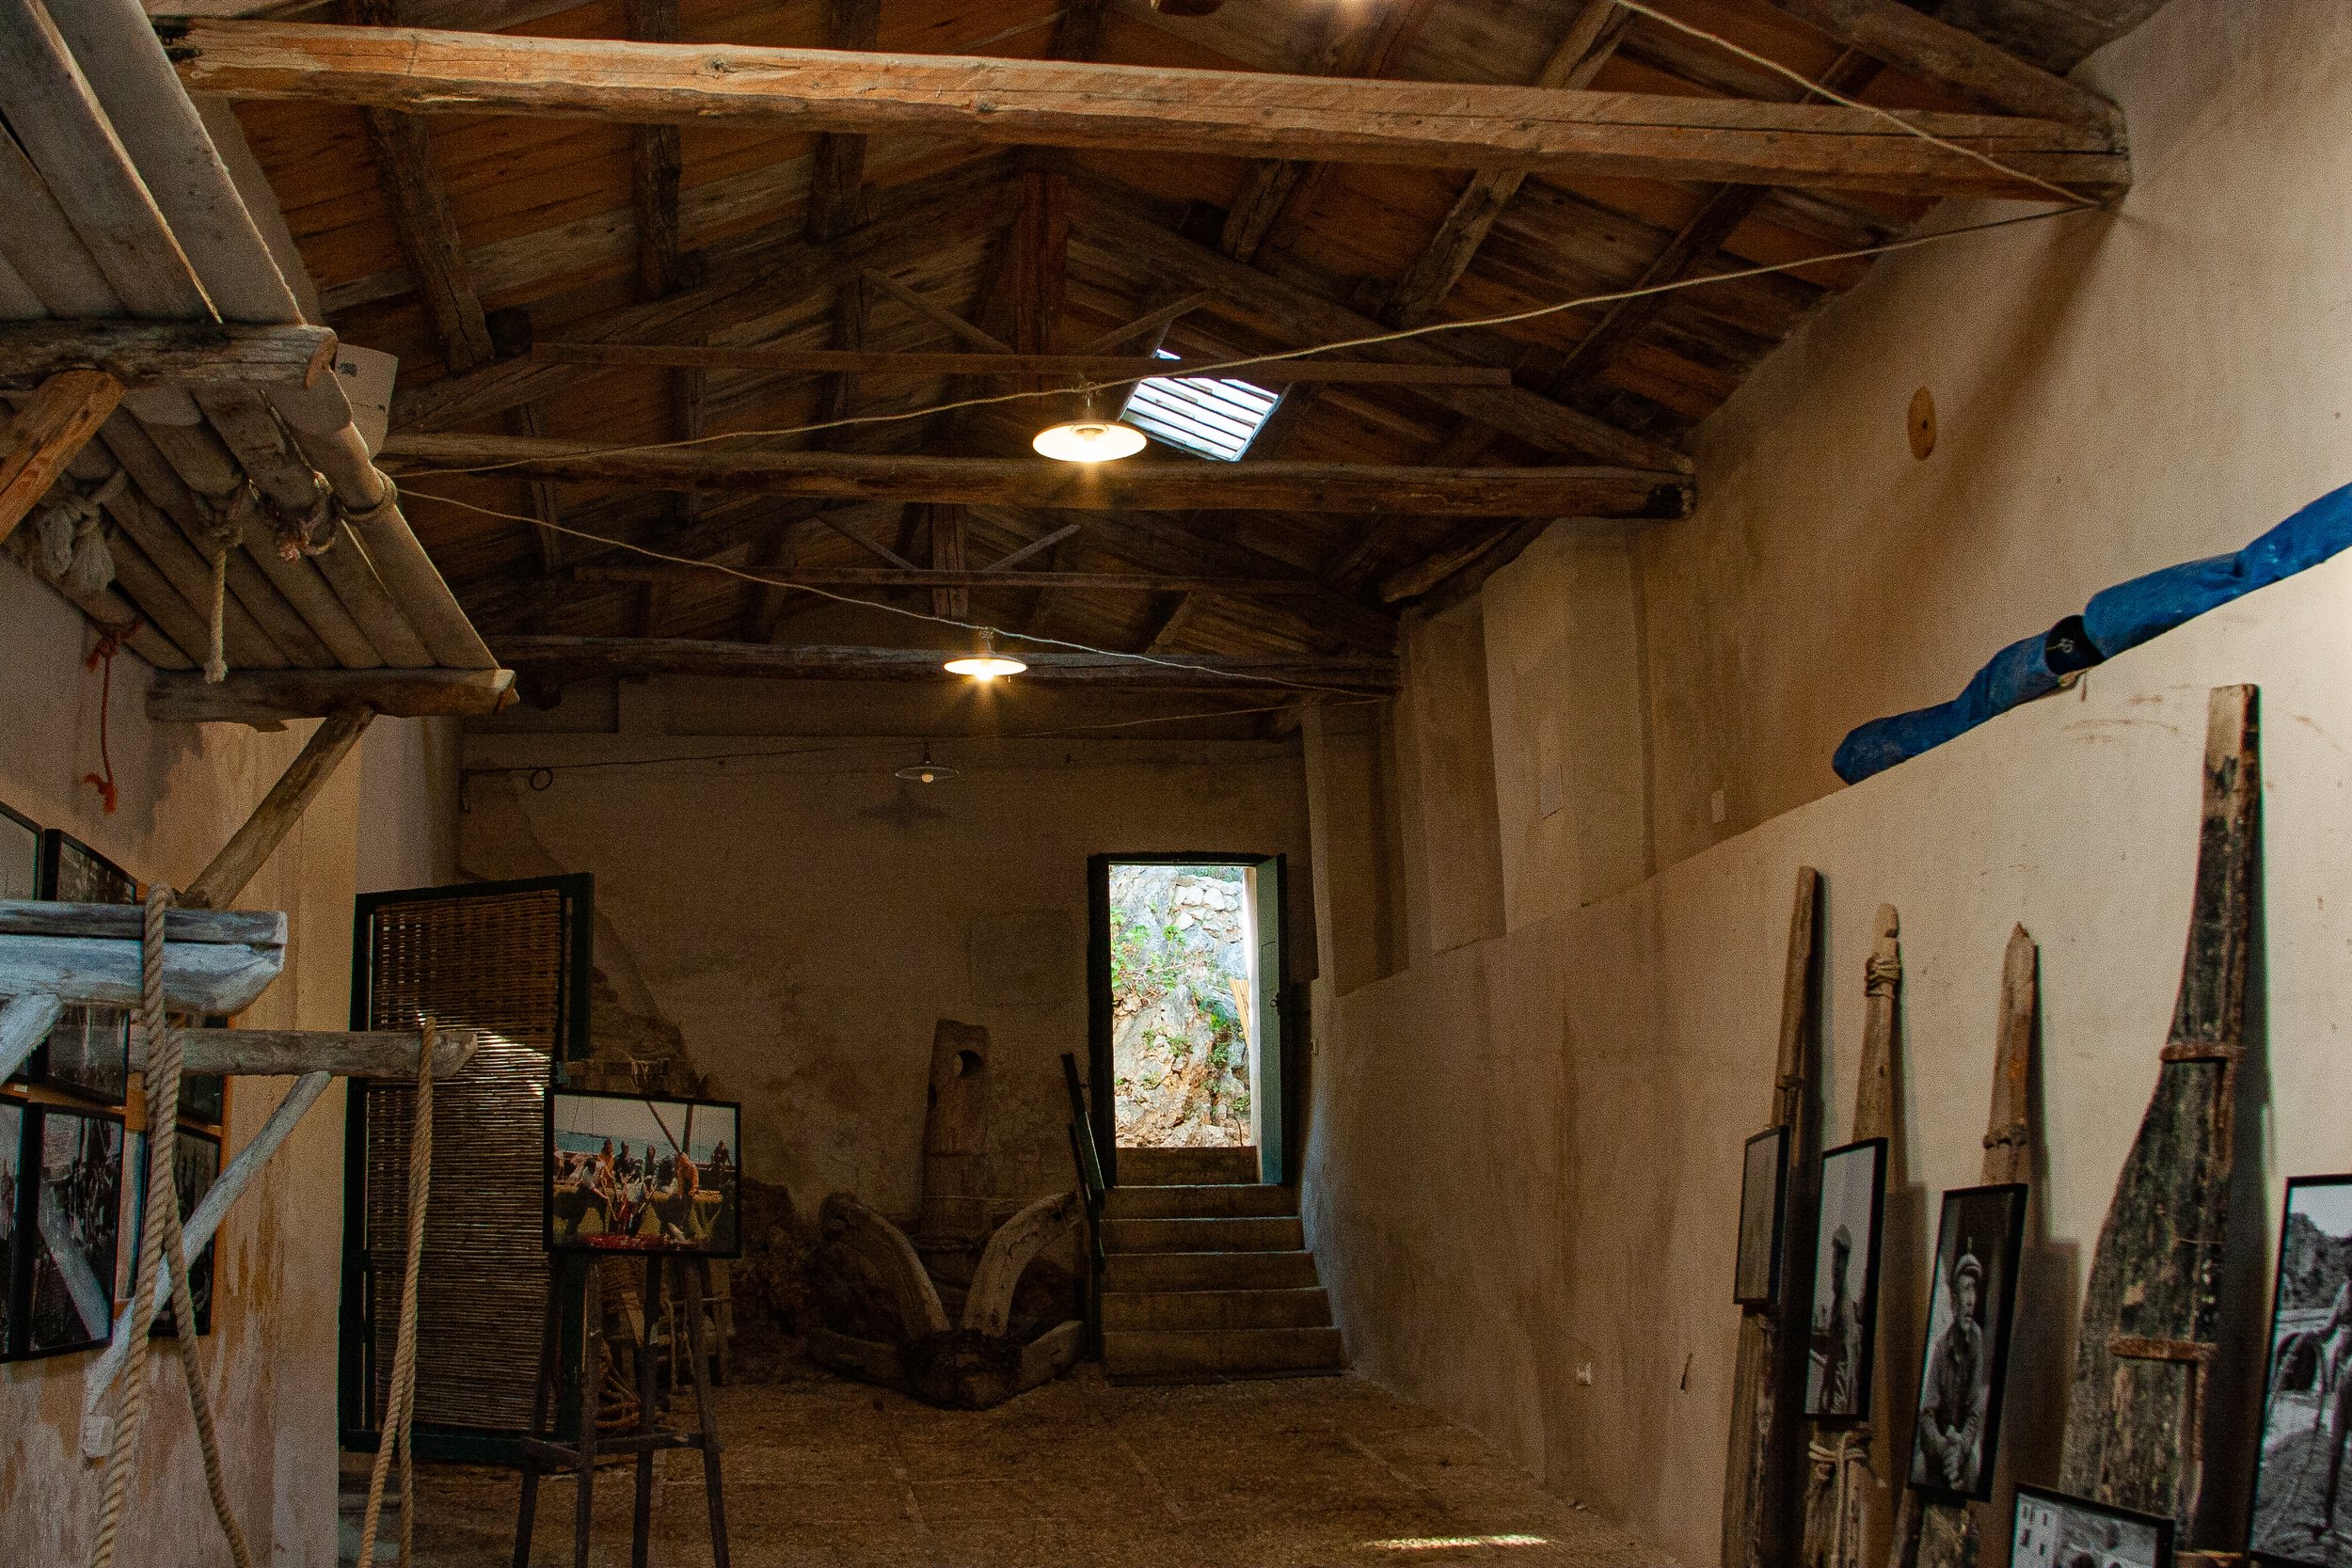  Figure 21. A view of one of the former storage areas at Scopello that had been converted into an exhibition space. Photograph by G. Vaccarino Gearty, 2022. 